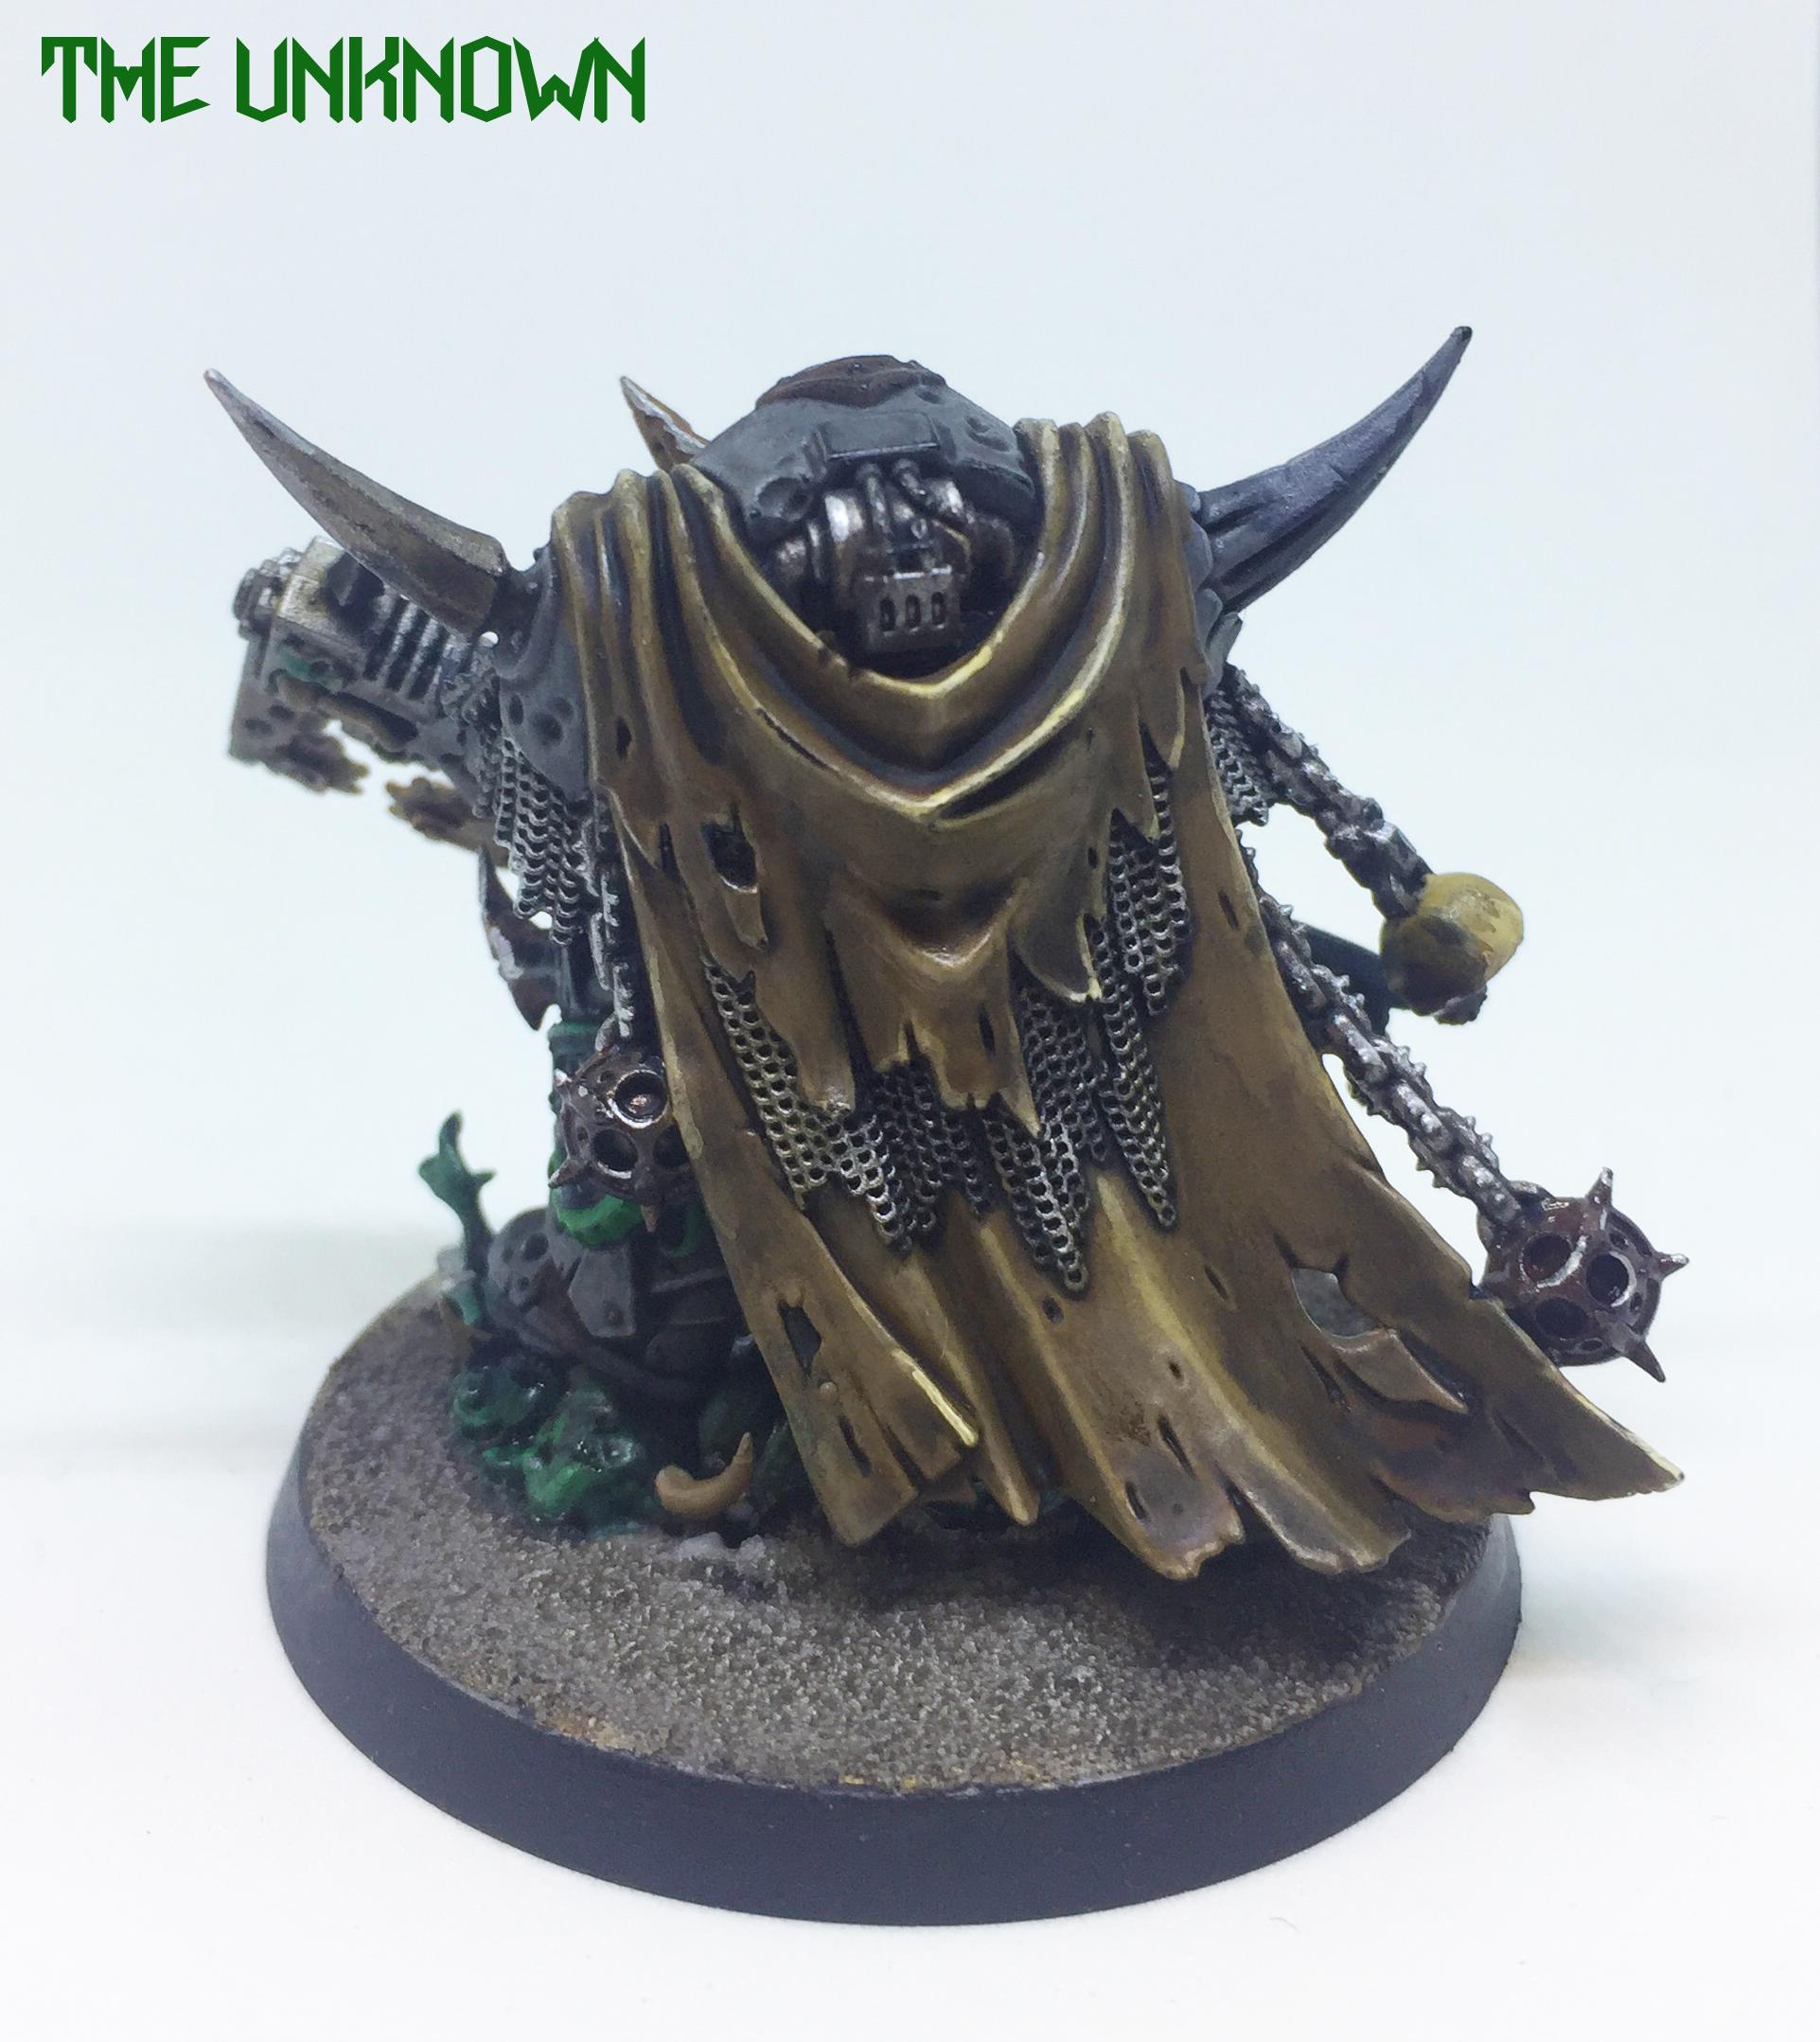 Chaos Lord, Chaos Space Marines, Dark Imperium, Death Guard, Lord Of Contagion, Nurgle, Terminator Armor, Warhammer 40,000